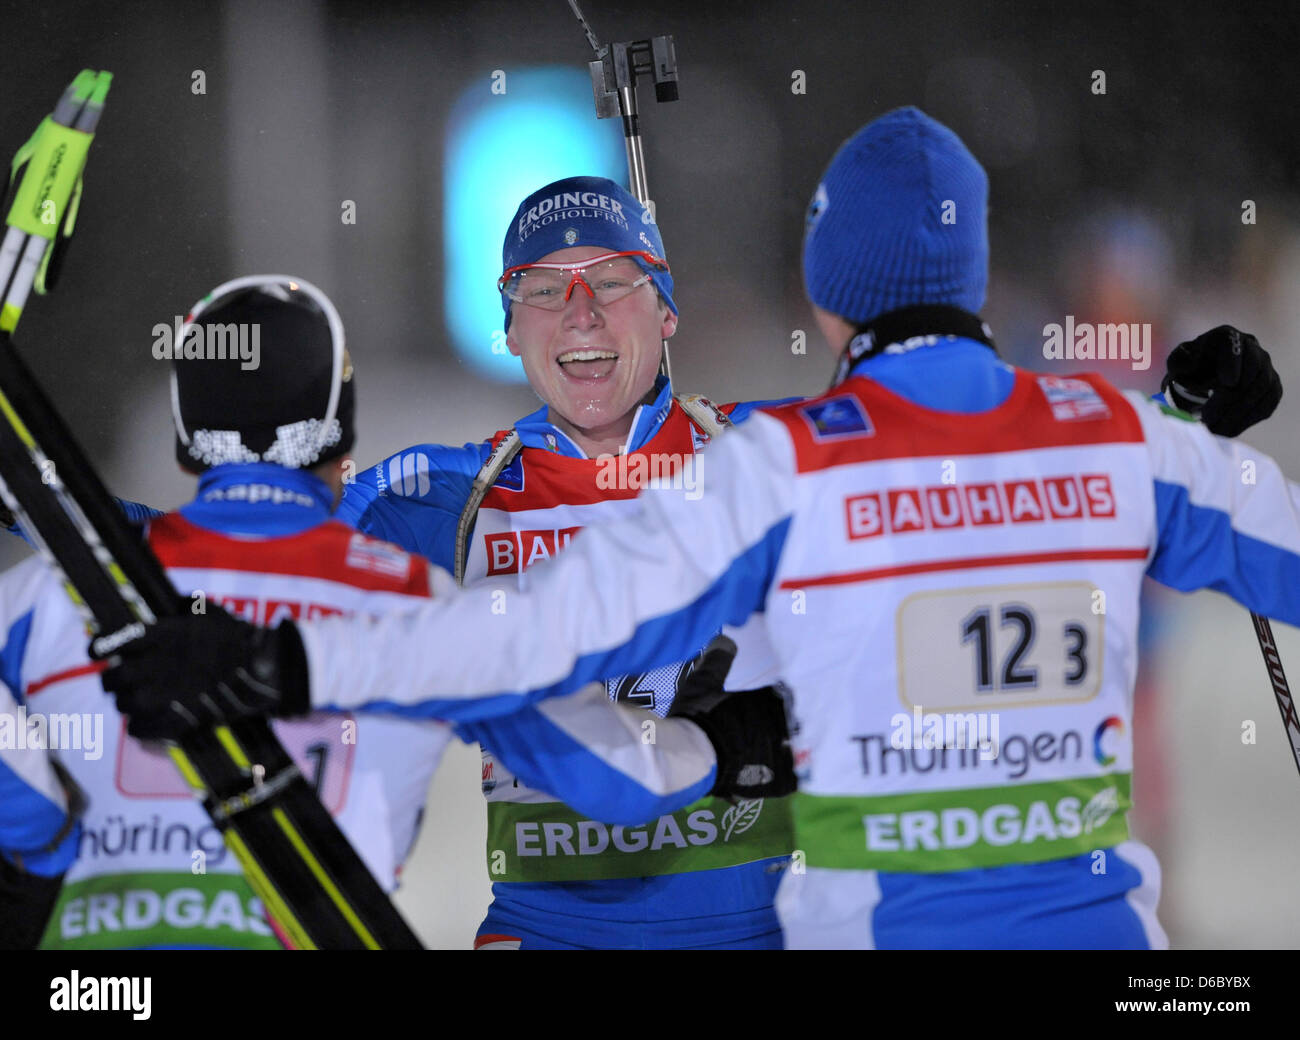 Italian biathlete Lukas Hofer (C) celebrates his victory with his team-mates Christian de Lorenzi (L) and Dominik Windisch (R) in the men's 4x7.5km relay of the Biathlon World Cup in Oberhof, Germany, 05 January 2012. Italy finished first, ahead of Russia and Sweden. Photo: Martin Schutt Stock Photo